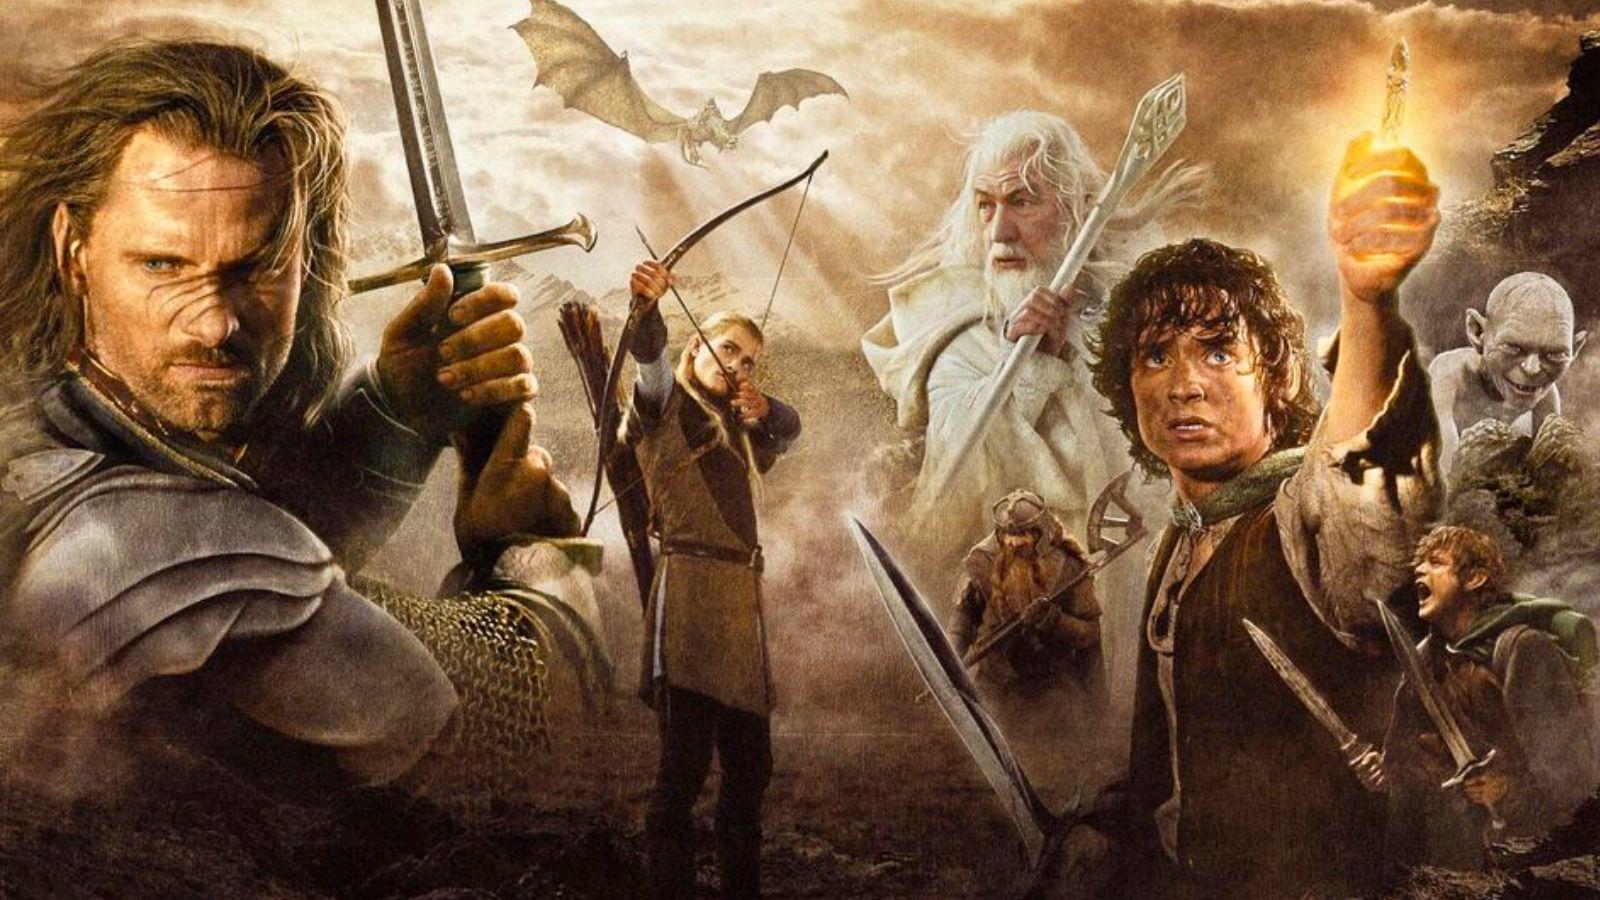 The Lord of the Rings trilogy key art.